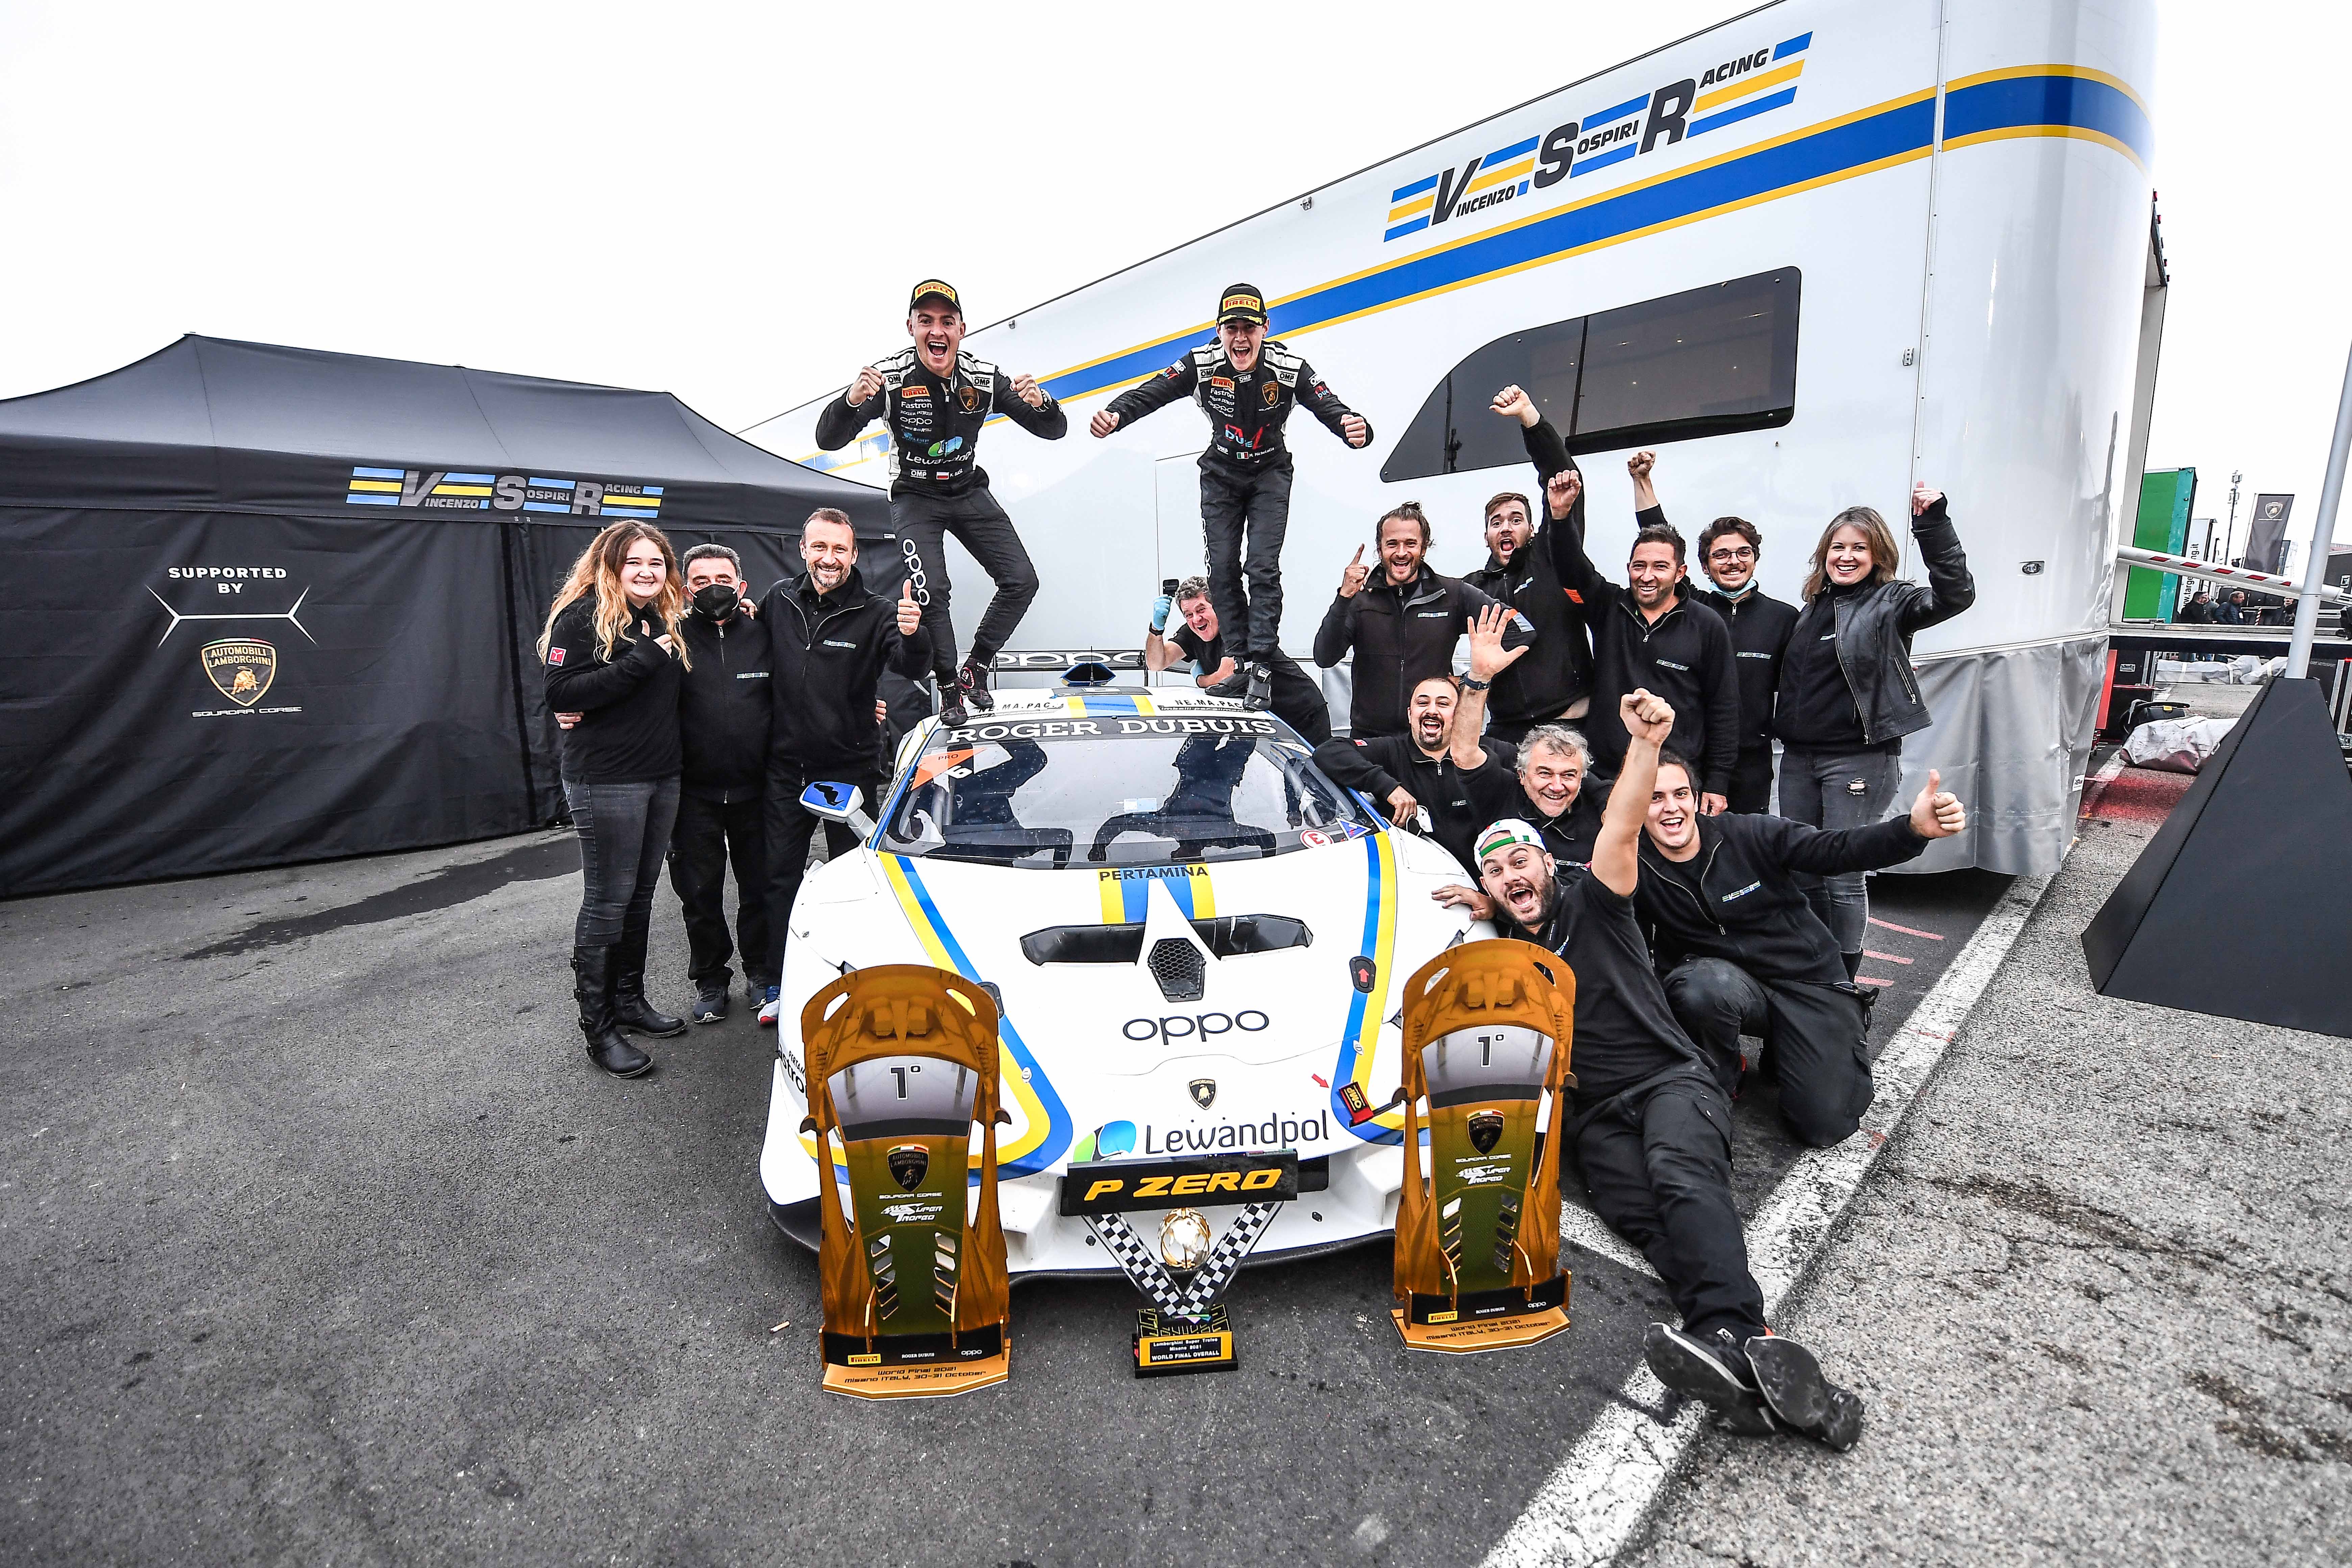 PERFECT WEEKEND FOR BASZ AND MICHELOTTO WHO TAKE LAMBORGHINI WORLD TITLE